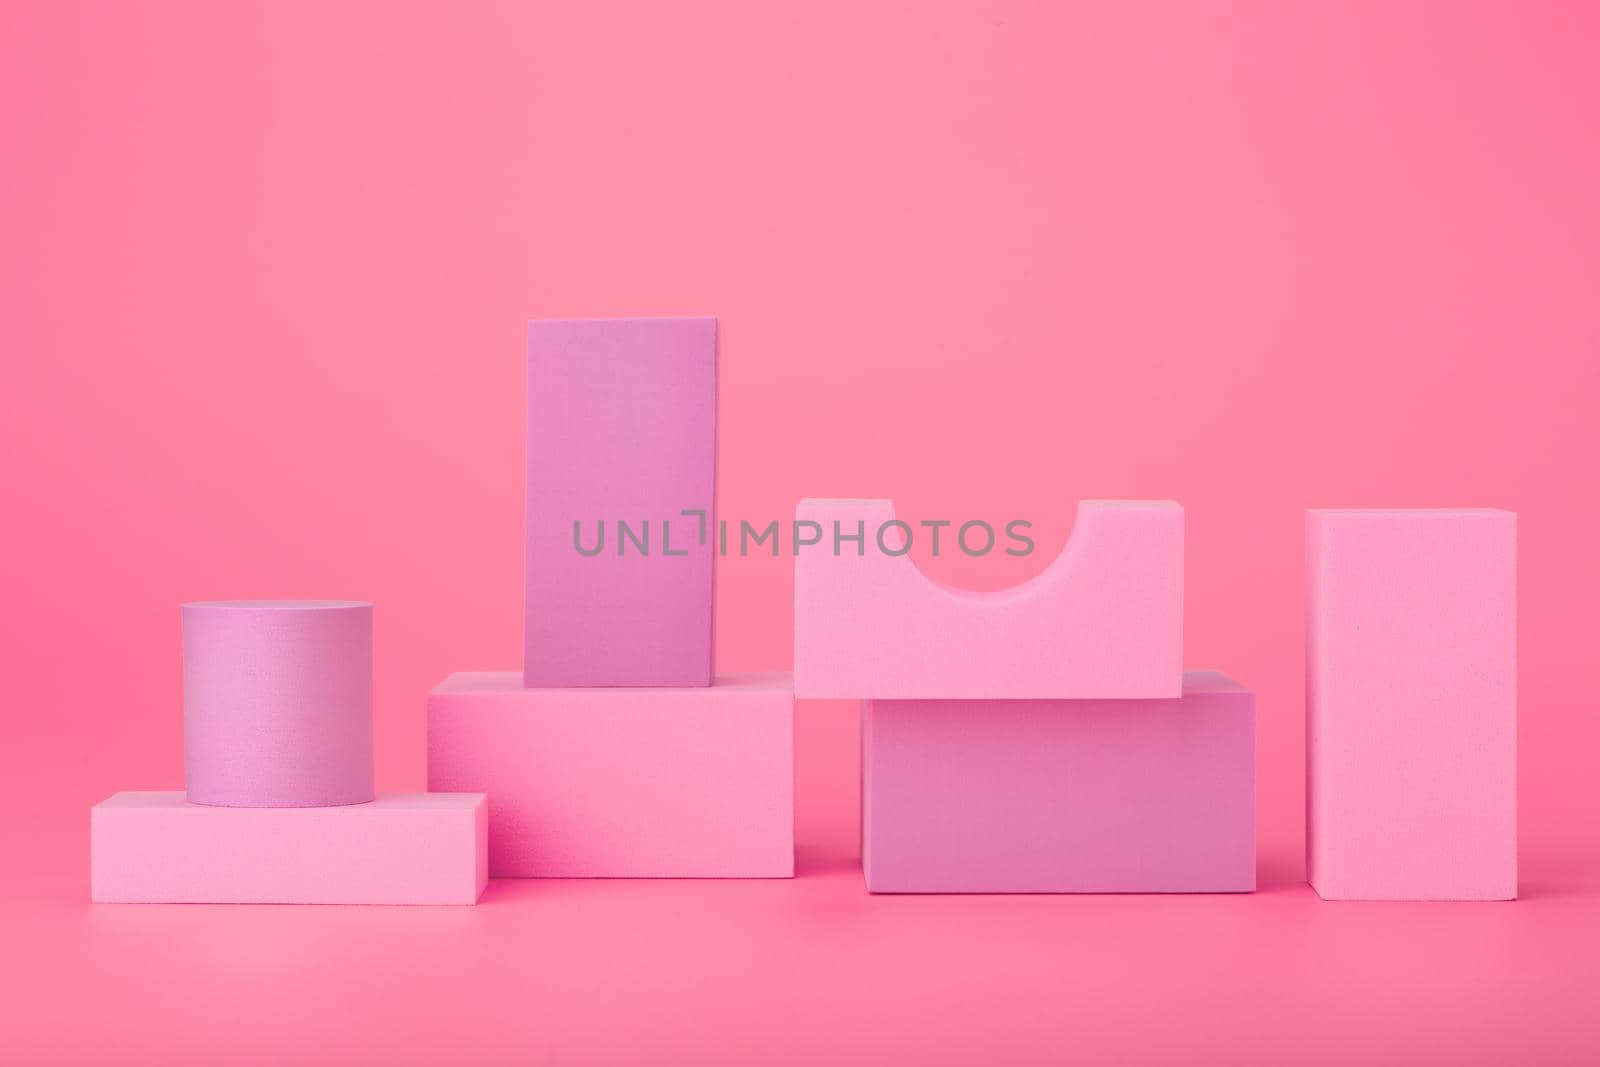 Light abstract background with pink and purple geometric figures against bright pink background by Senorina_Irina